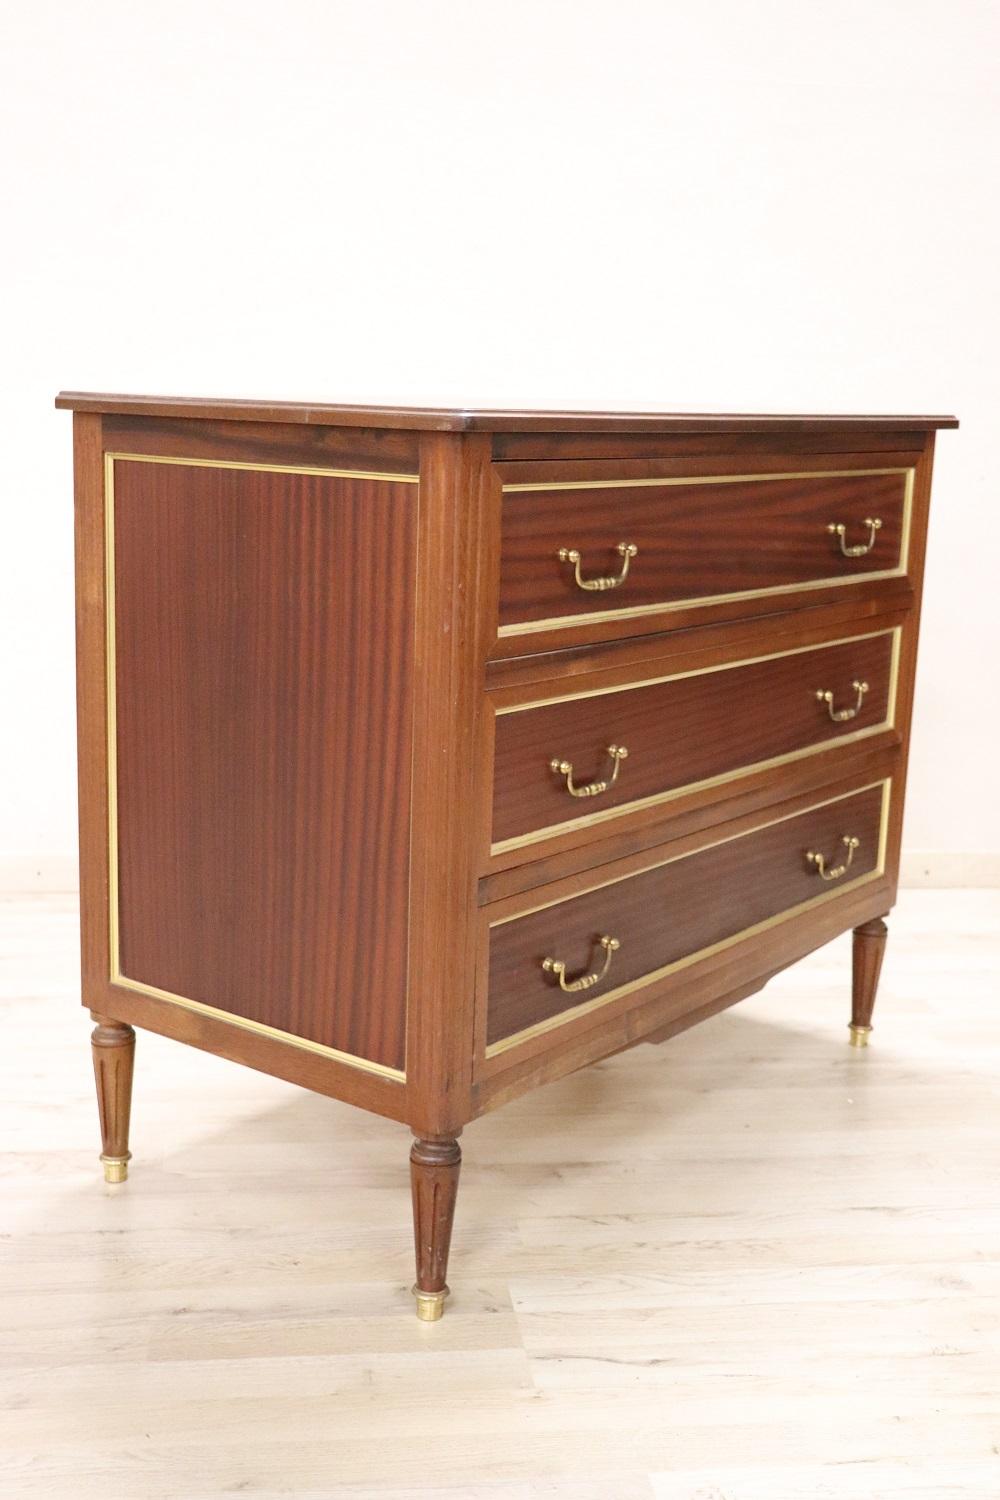 Rare and fine quality Italian Louis XVI style 1950s chest of drawer in elegant mahogany wood. On the front three comfortable drawers. Featuring elegant golden brass frames. Simple and elegant line. Beautiful slender legs. Due to its small size it is